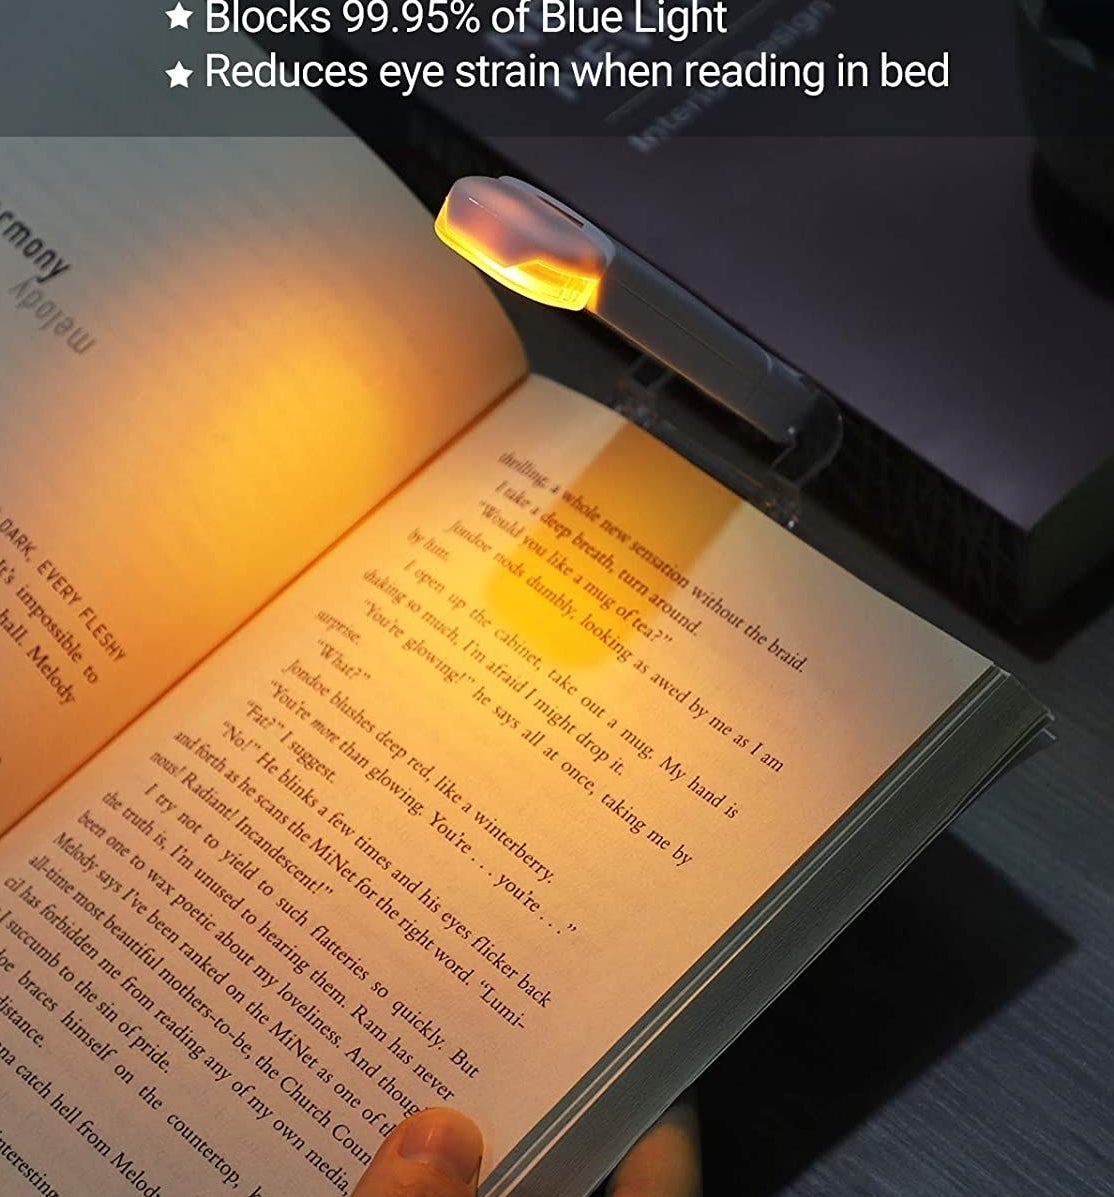 a book illuminated by the soft glow of a book light